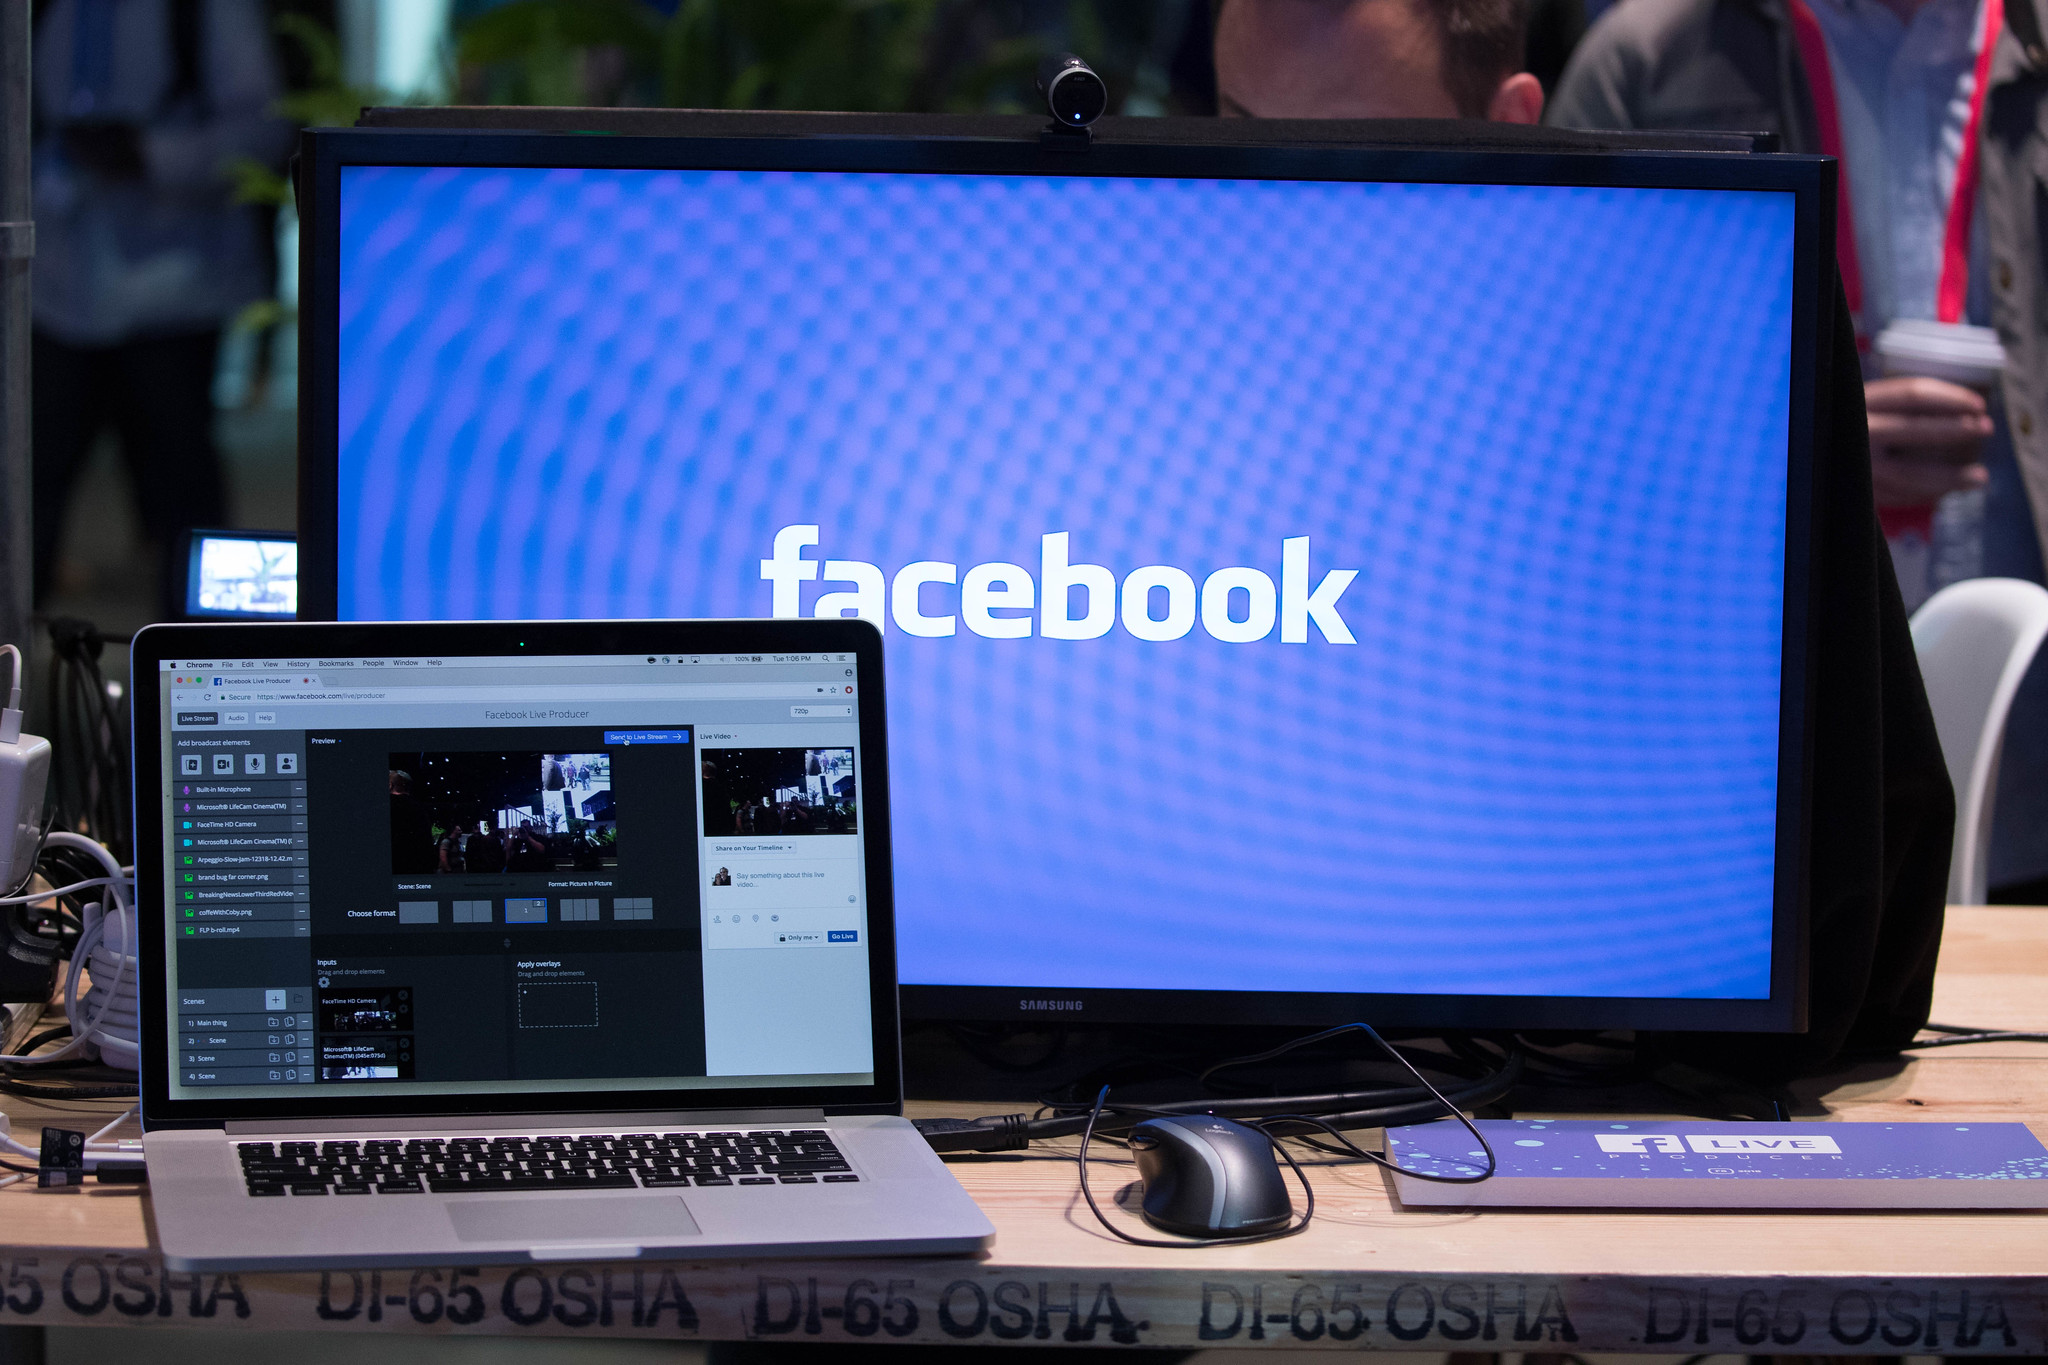 Facebook F8 2018, April 30, 2018. (Anthony Quintano/CC BY 2.0)